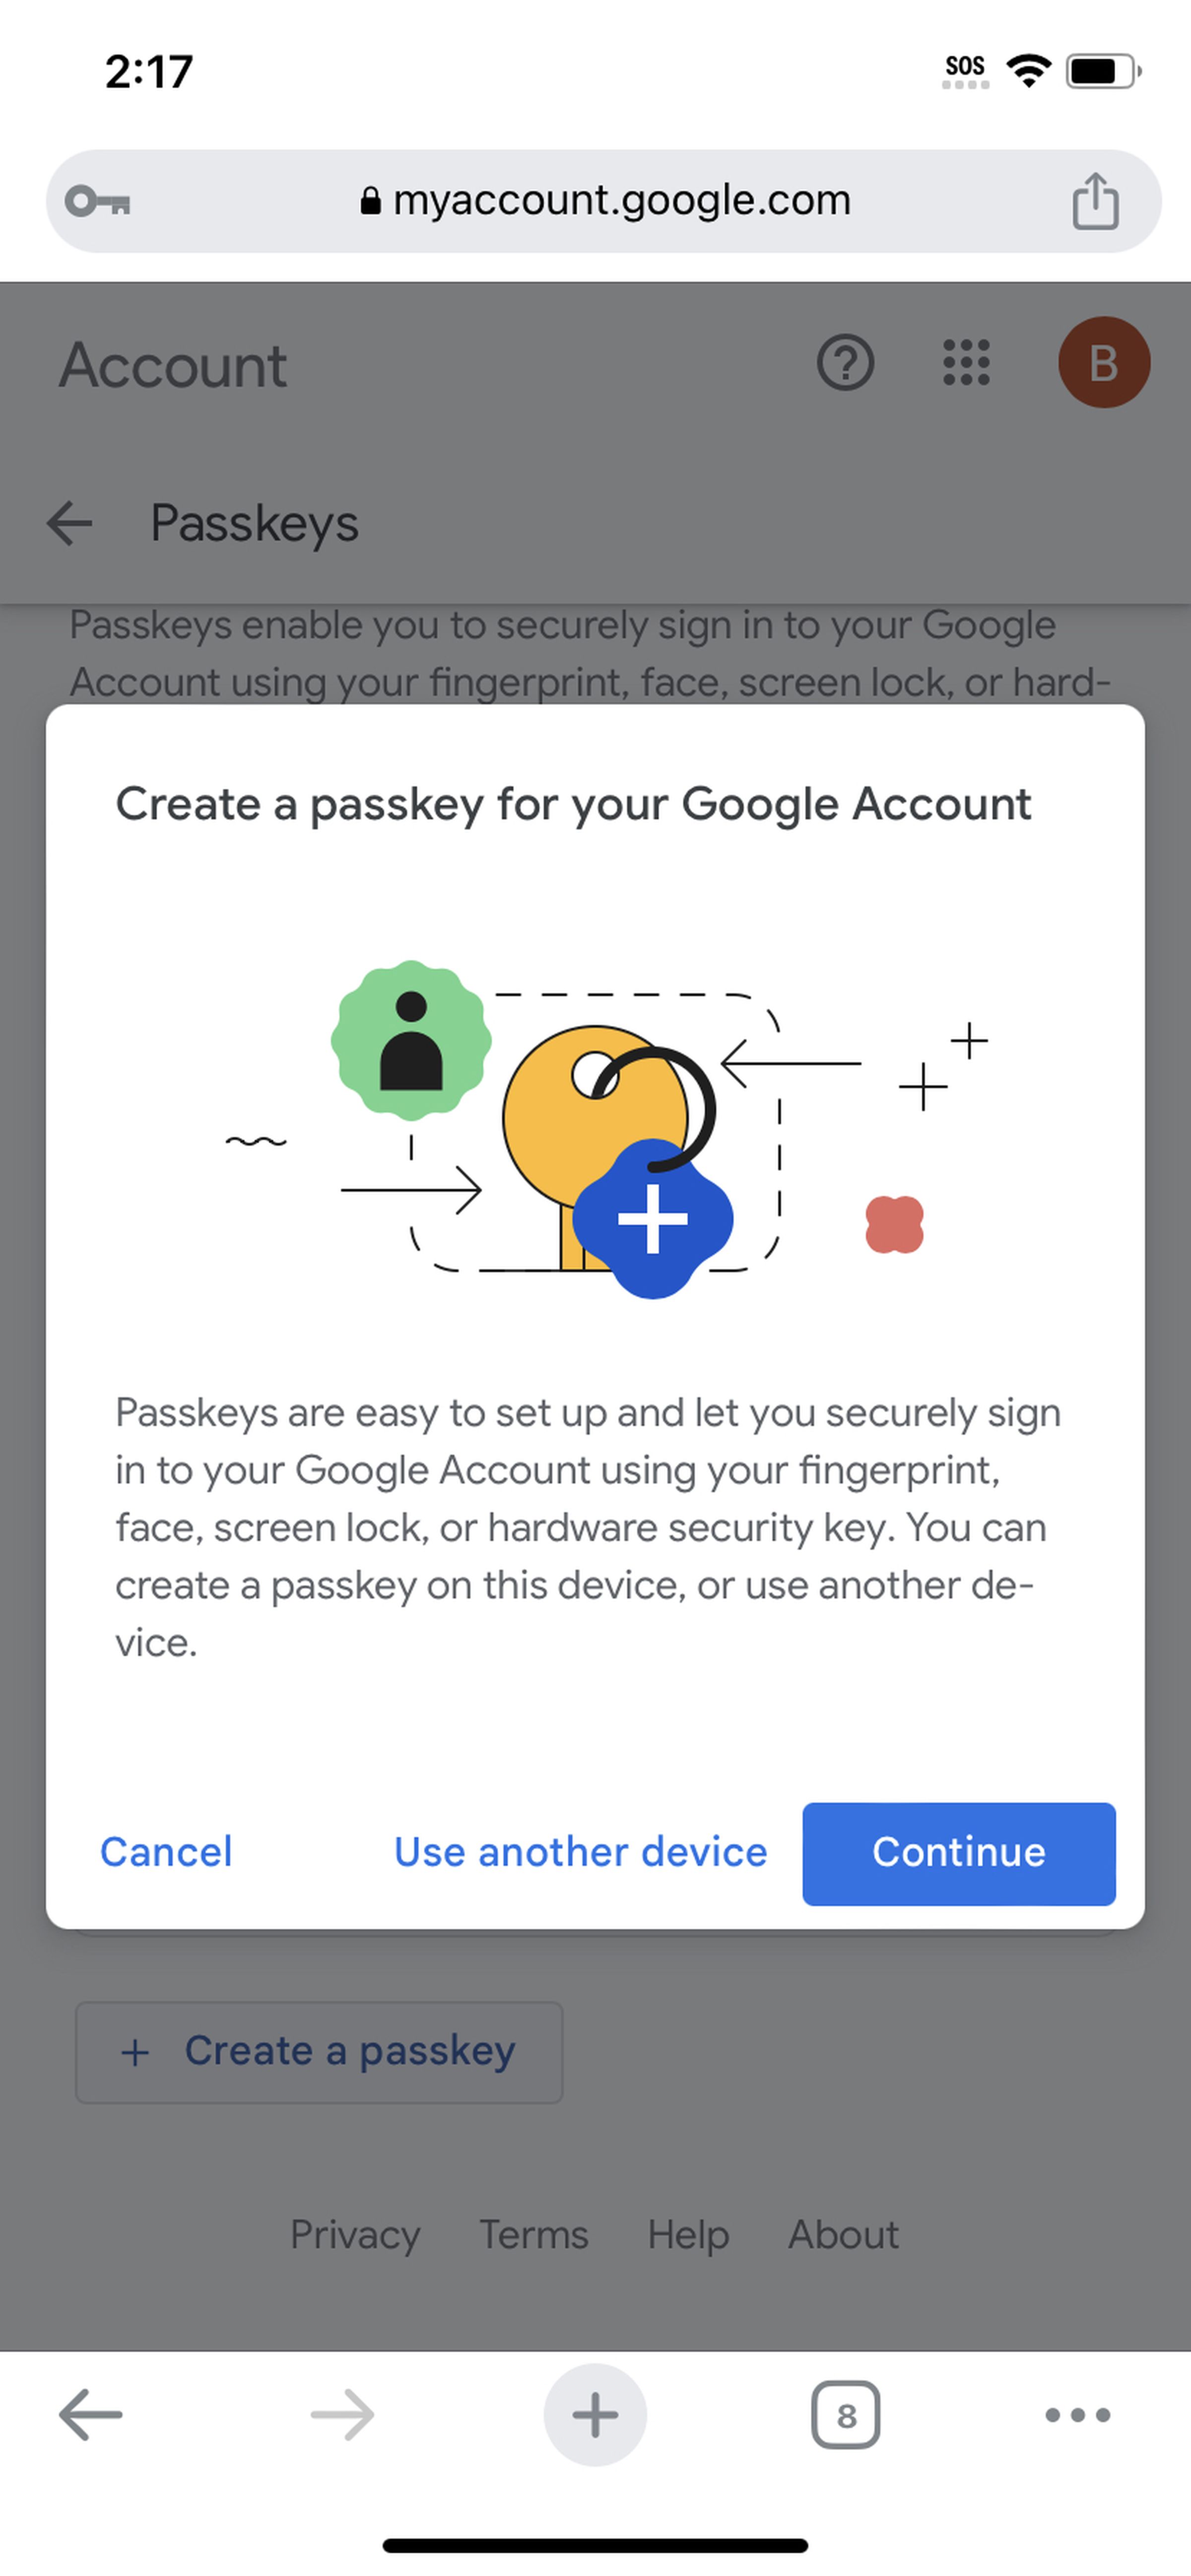 tech news Mobile screen with pop-up window headed Create a passkey for your Google Account.